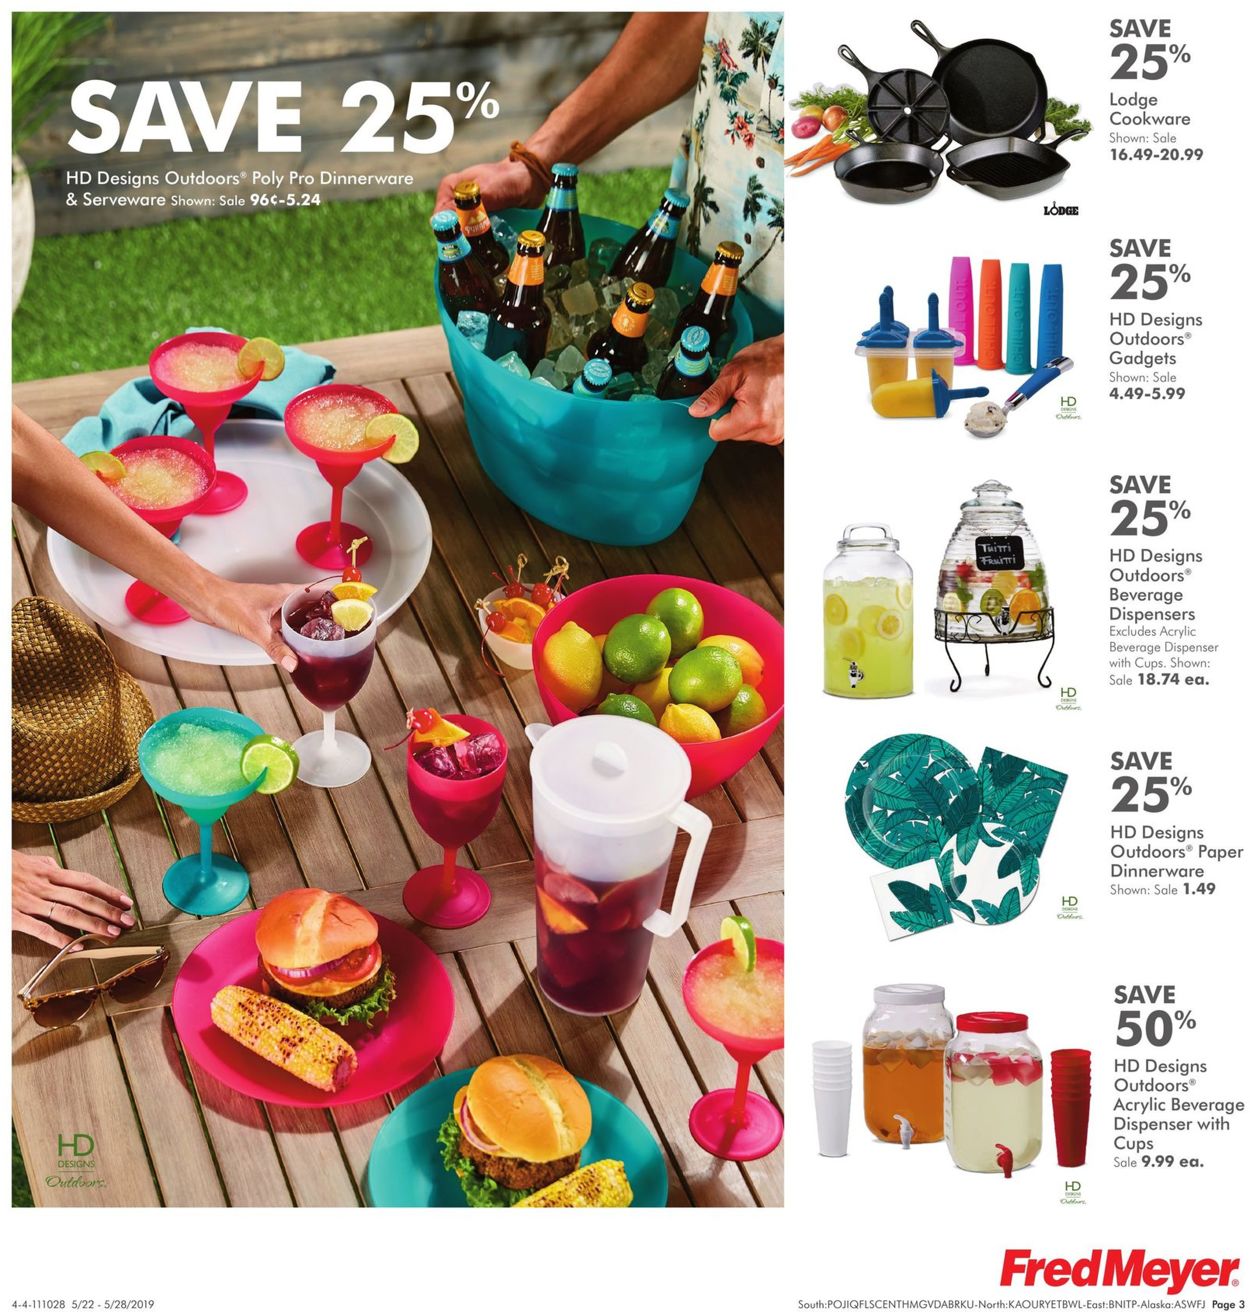 Fred Meyer Weekly Ad Circular - valid 05/22-05/28/2019 (Page 3)